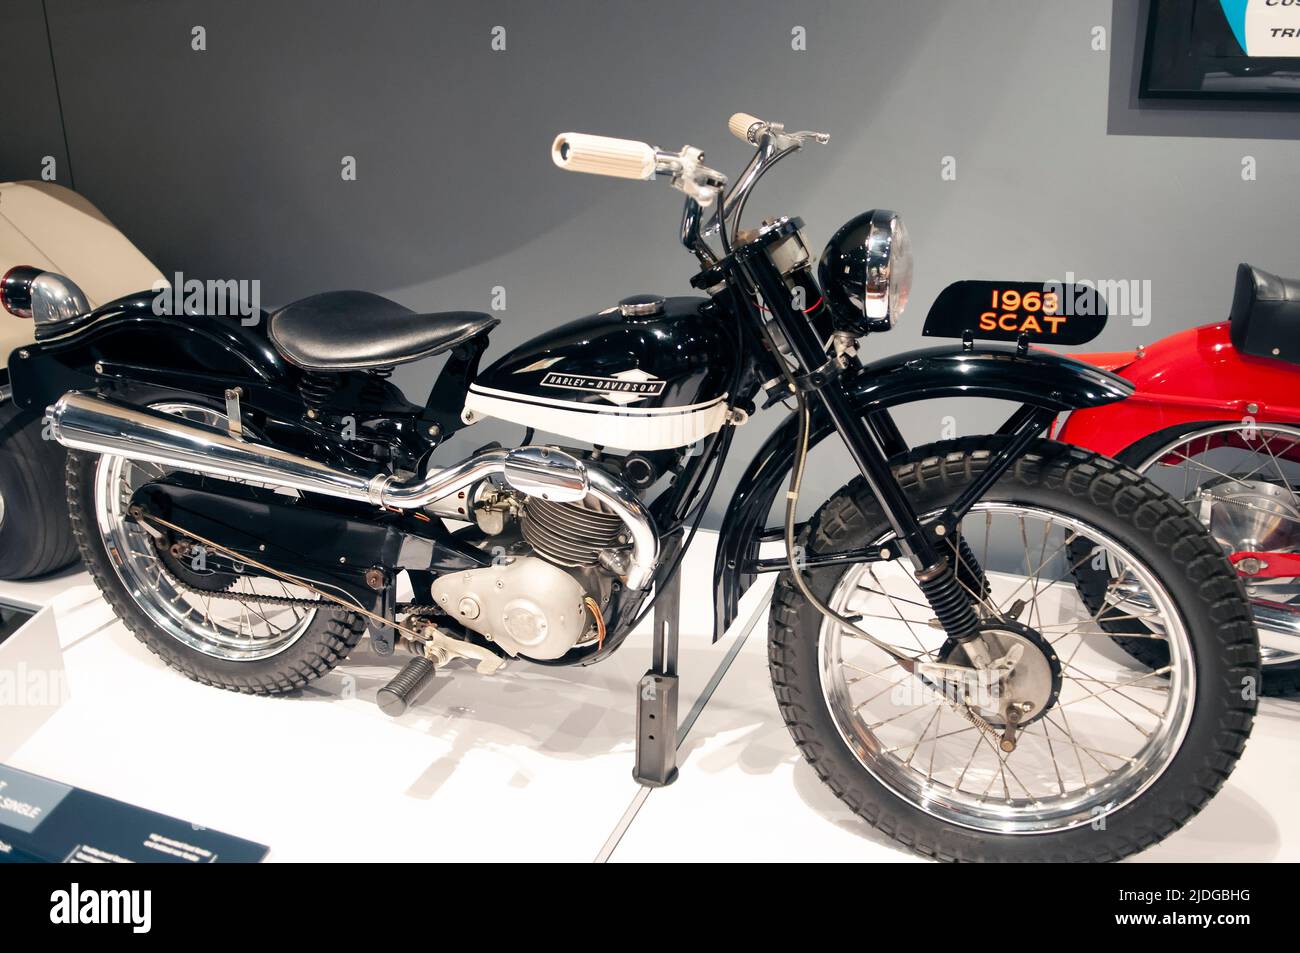 A 1963 Scat Harley Davidson Motorcycle as seen in the Harley Davidson Museum in Milwaukee, Wisconsin. Stock Photo